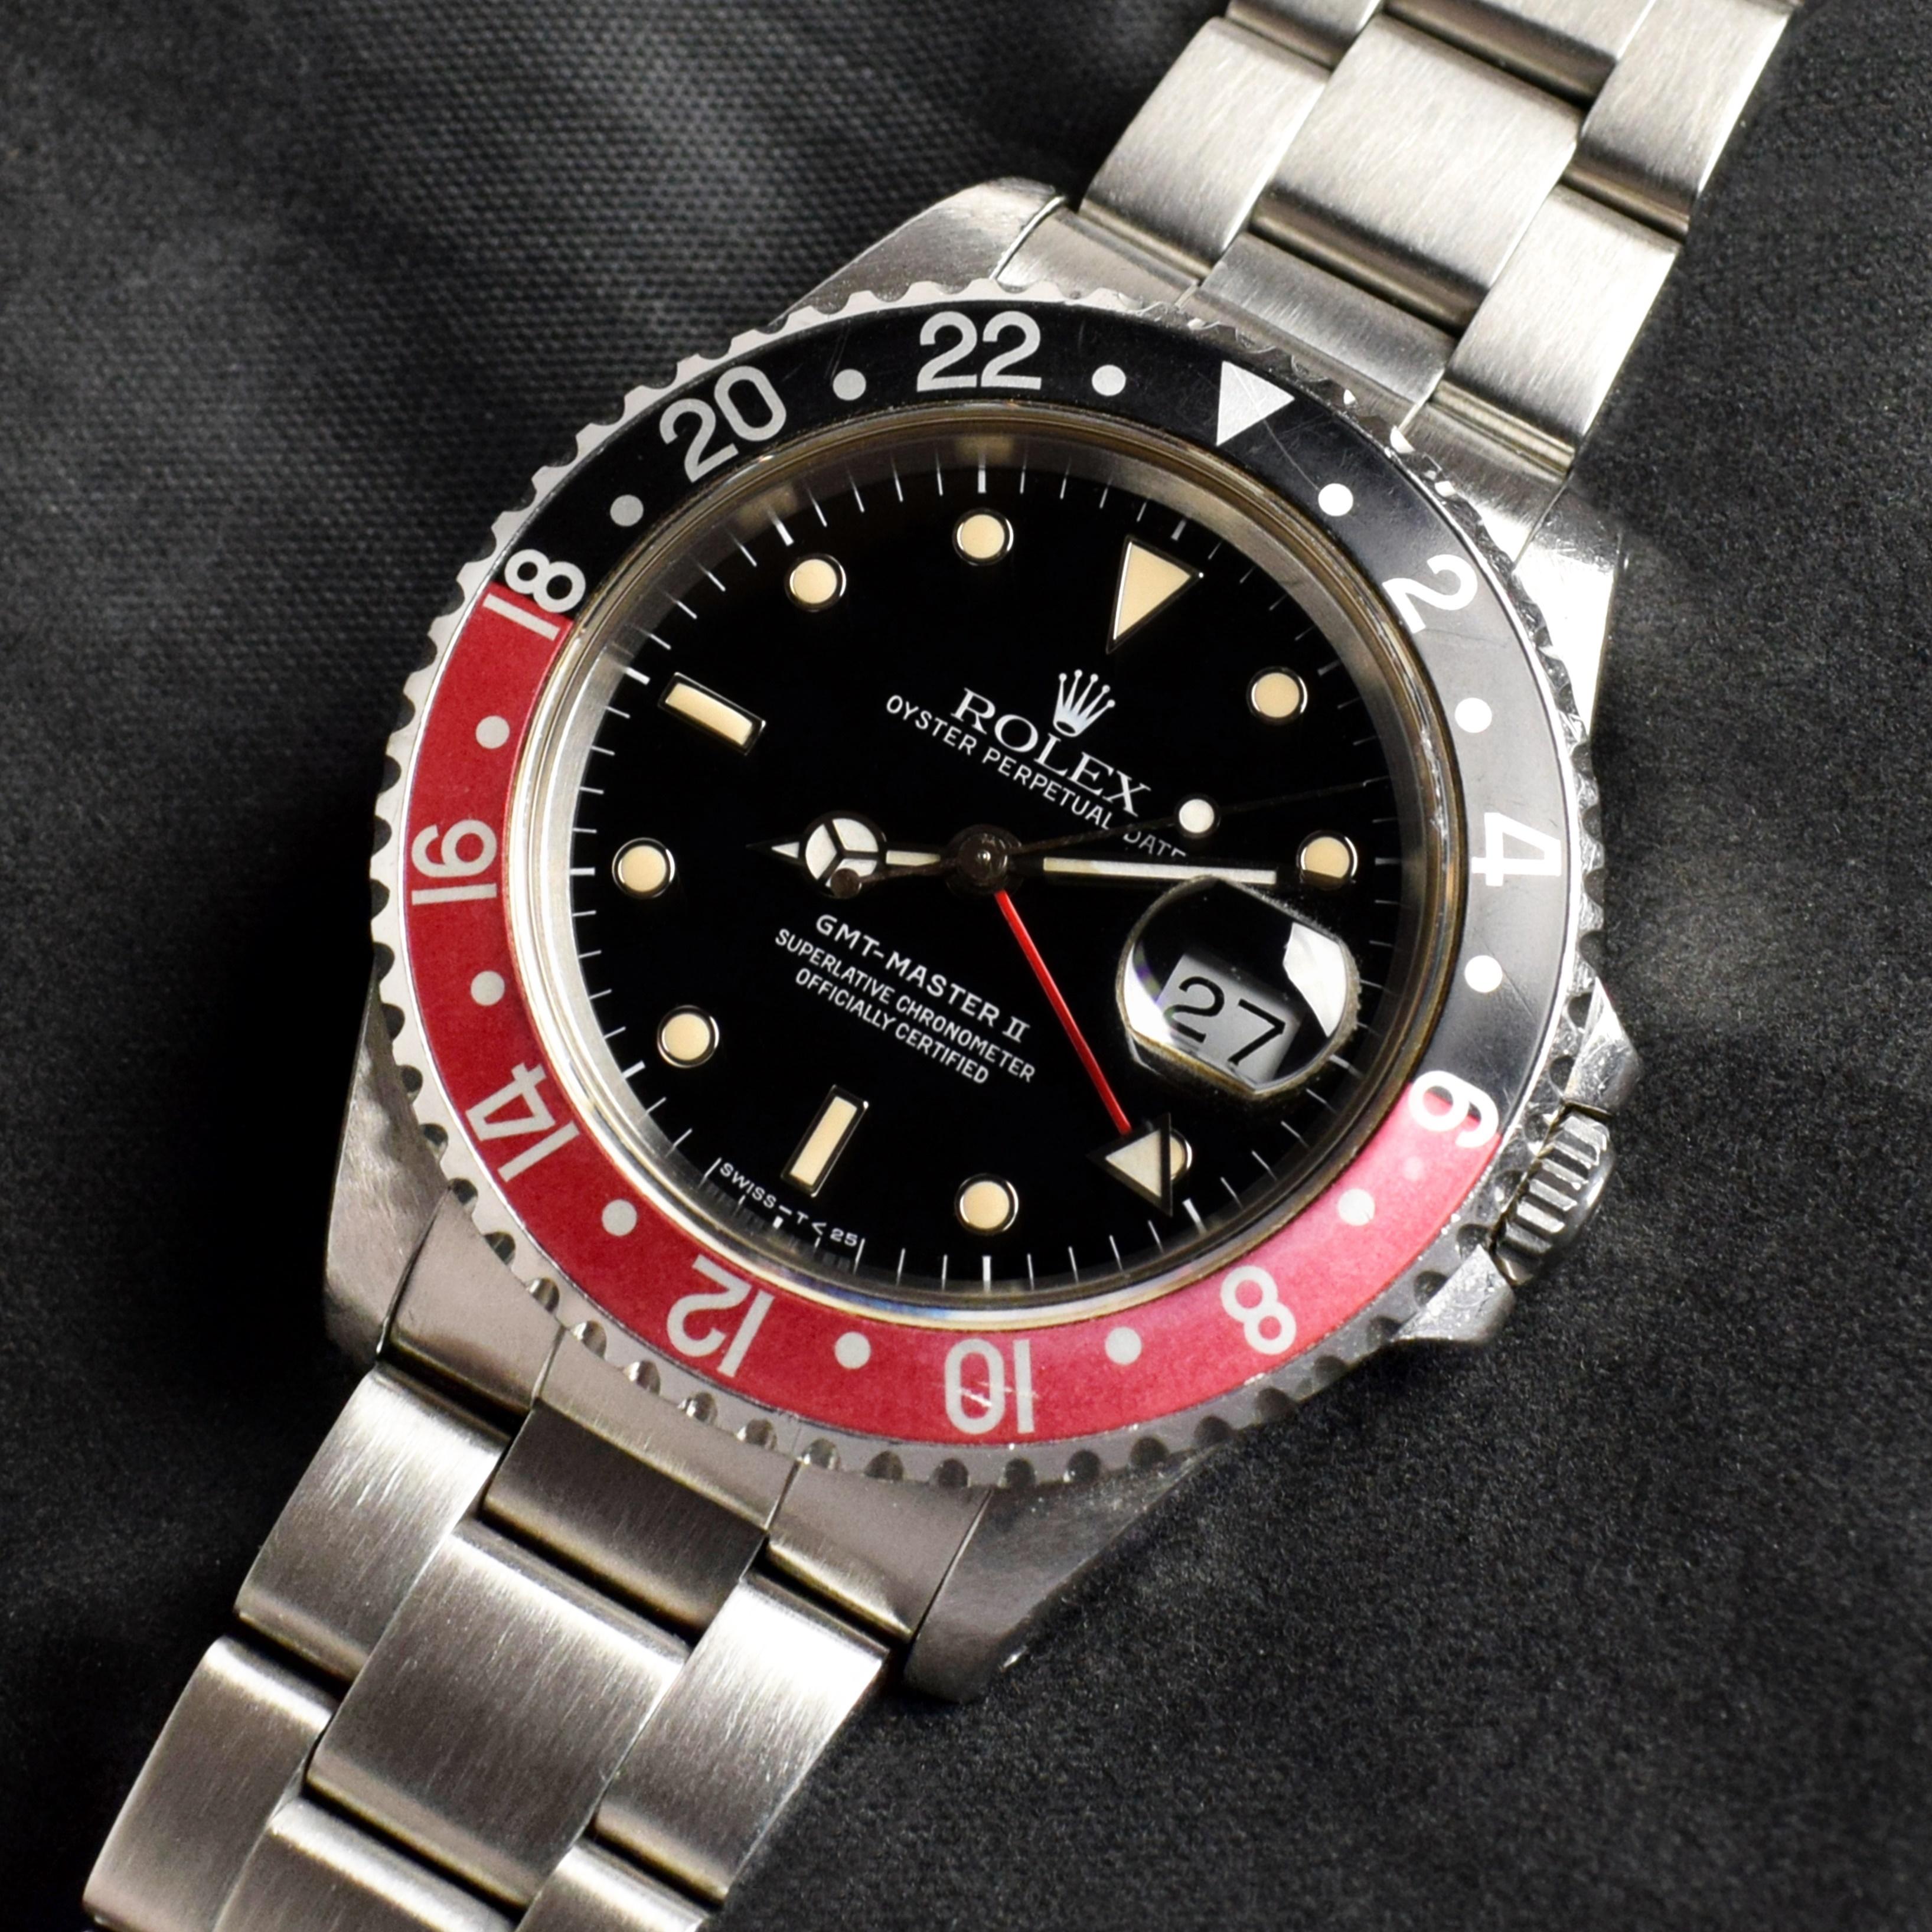 Brand: Rolex
Model: 16710
Year: 1991
Serial number: N3xxxxx
Reference: C03660

Case: Show sign of wear w/ slight polishing from previous; inner case back stamped 16710

Dial: Excellent Condition Black Tritium Dial where the lumes have turned into